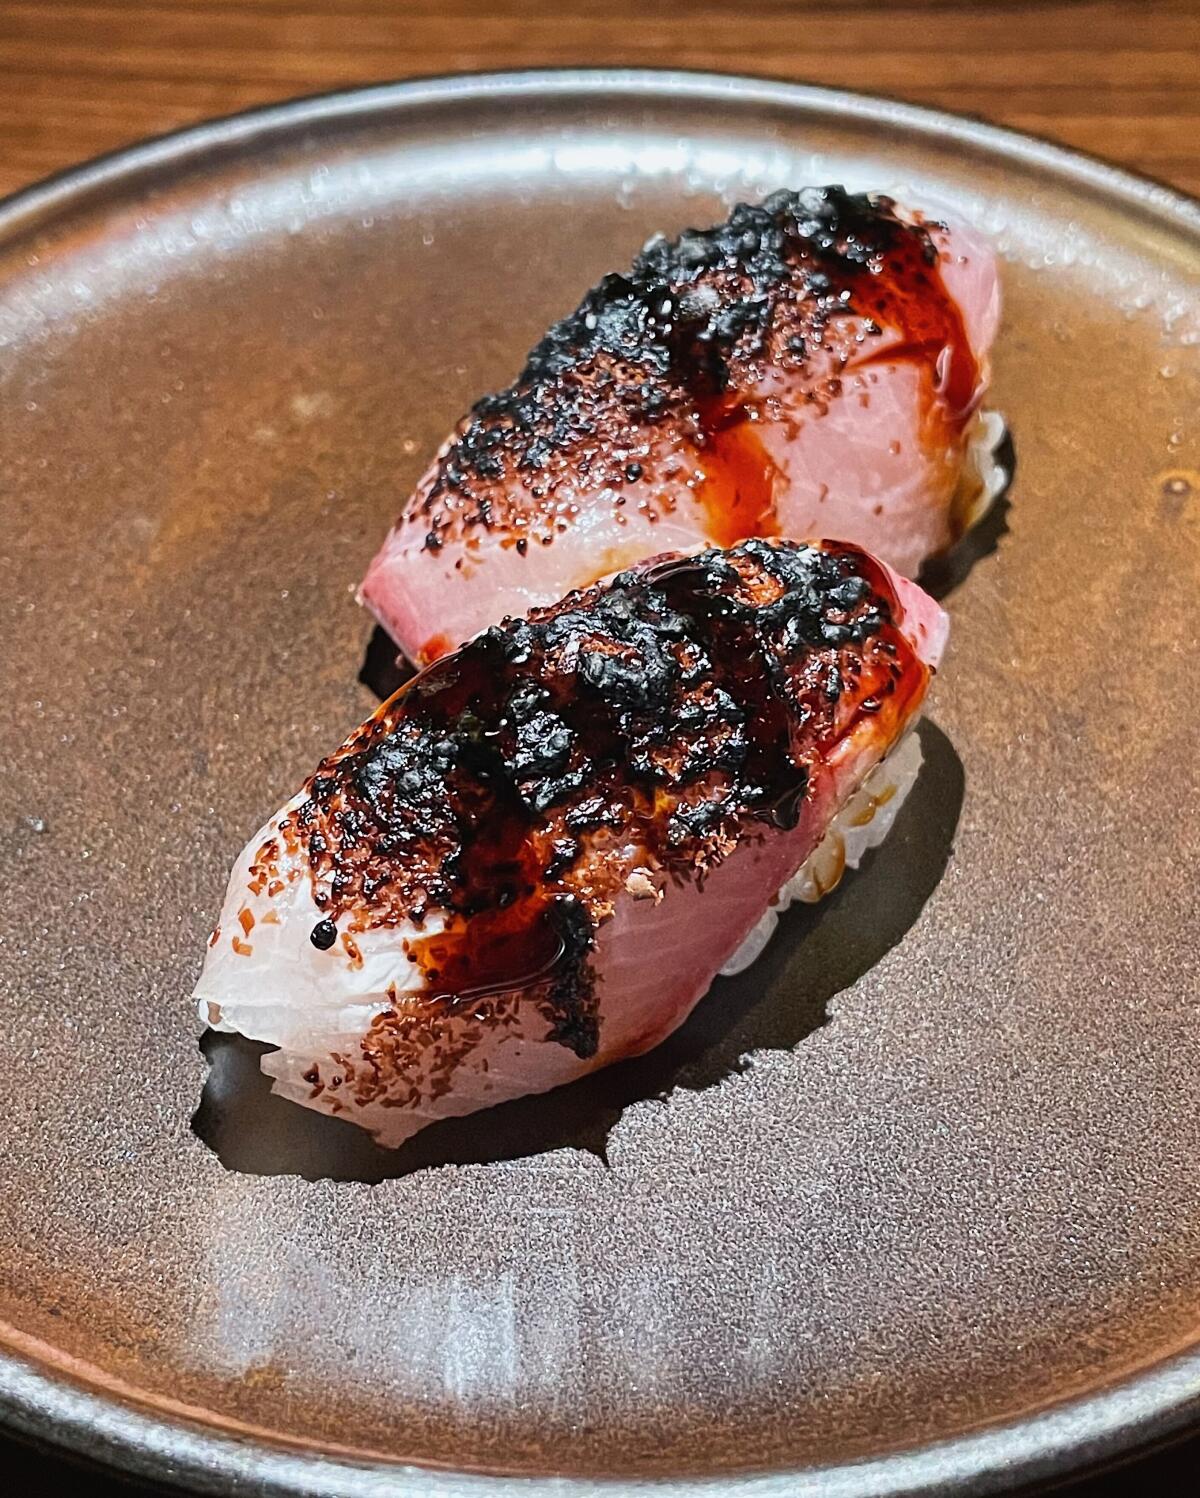 Two pieces of hamachi nigiri topped with Oaxacan chocolate on a brown ceramic plate